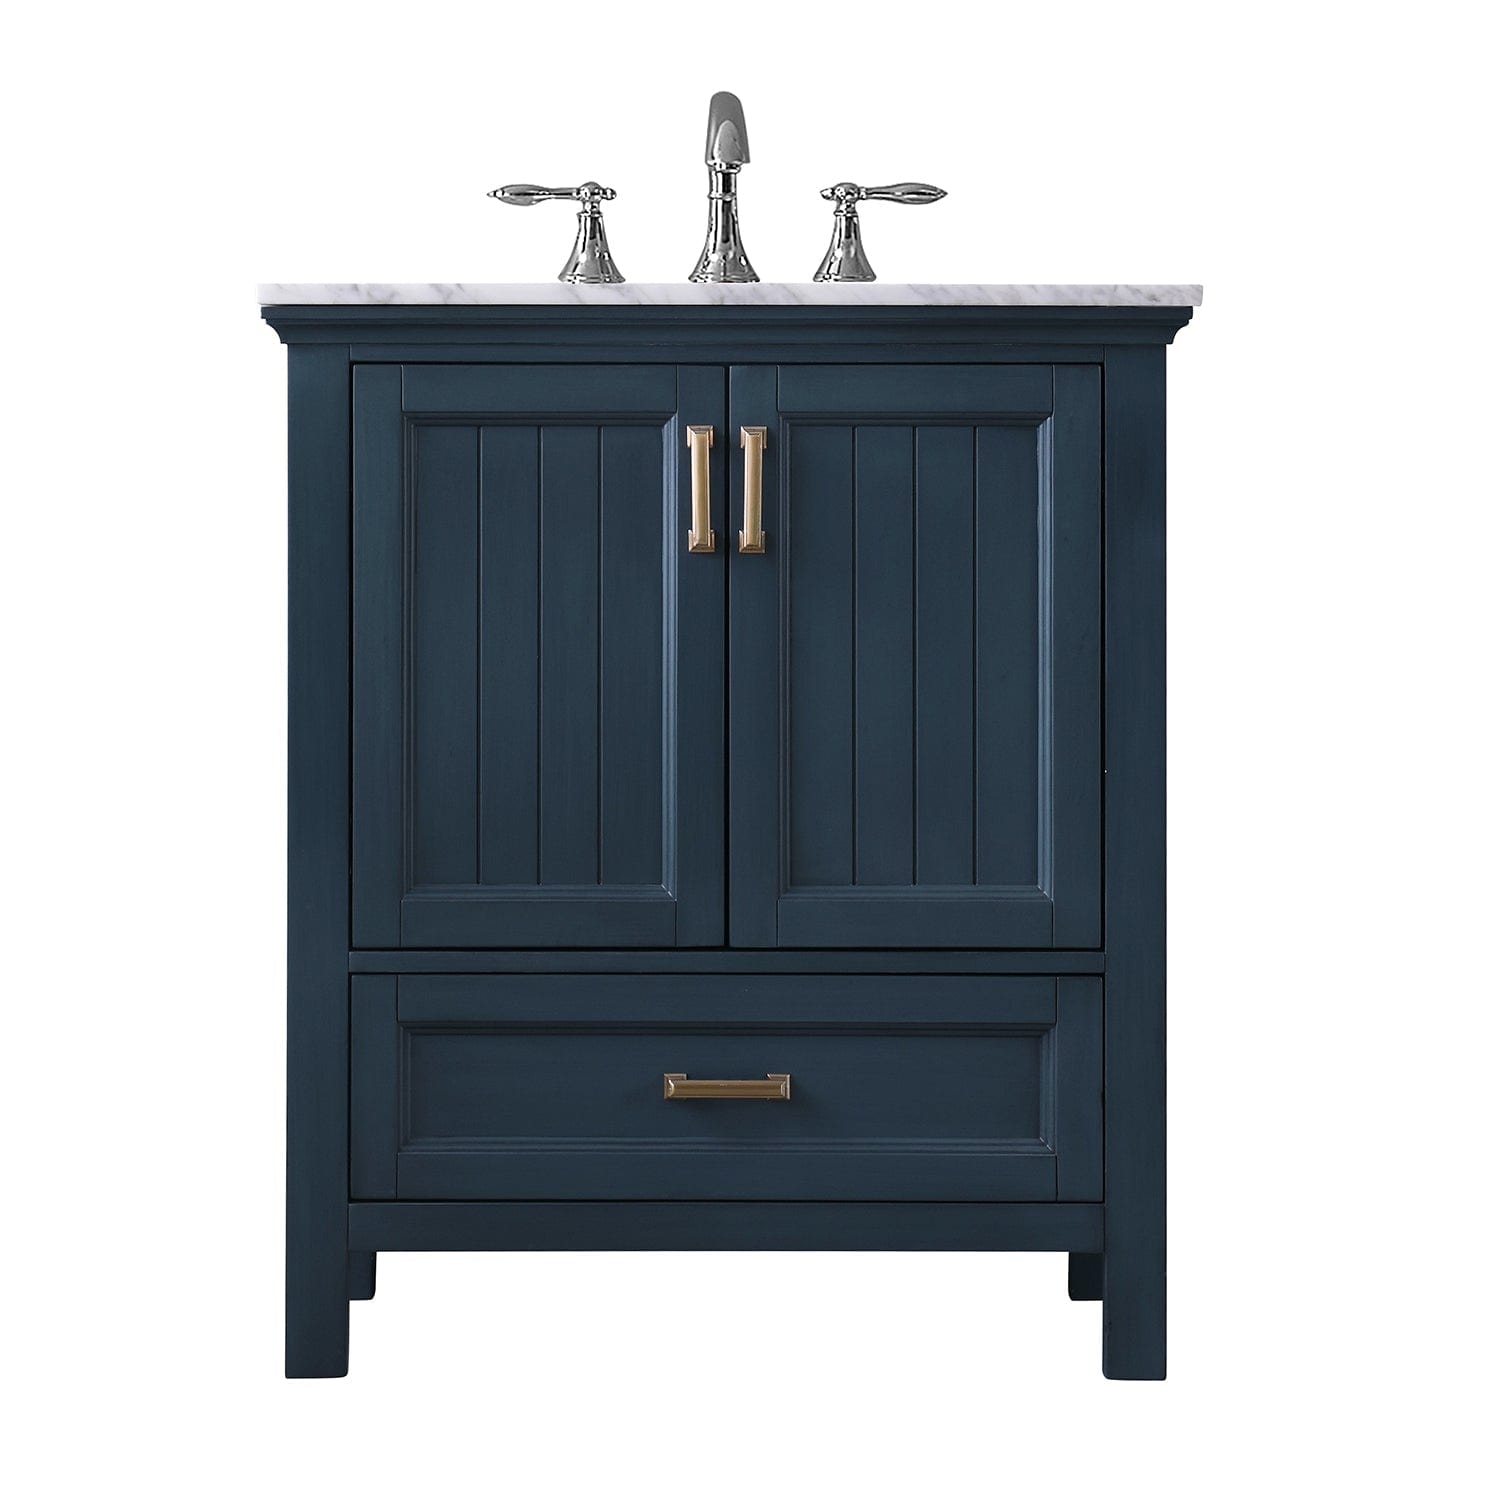 Altair Isla 30" Single Bathroom Vanity Set in Classic Blue and Carrara White Marble Countertop without Mirror 538030-CB-CA-NM - Molaix631112970747Vanity538030-CB-CA-NM